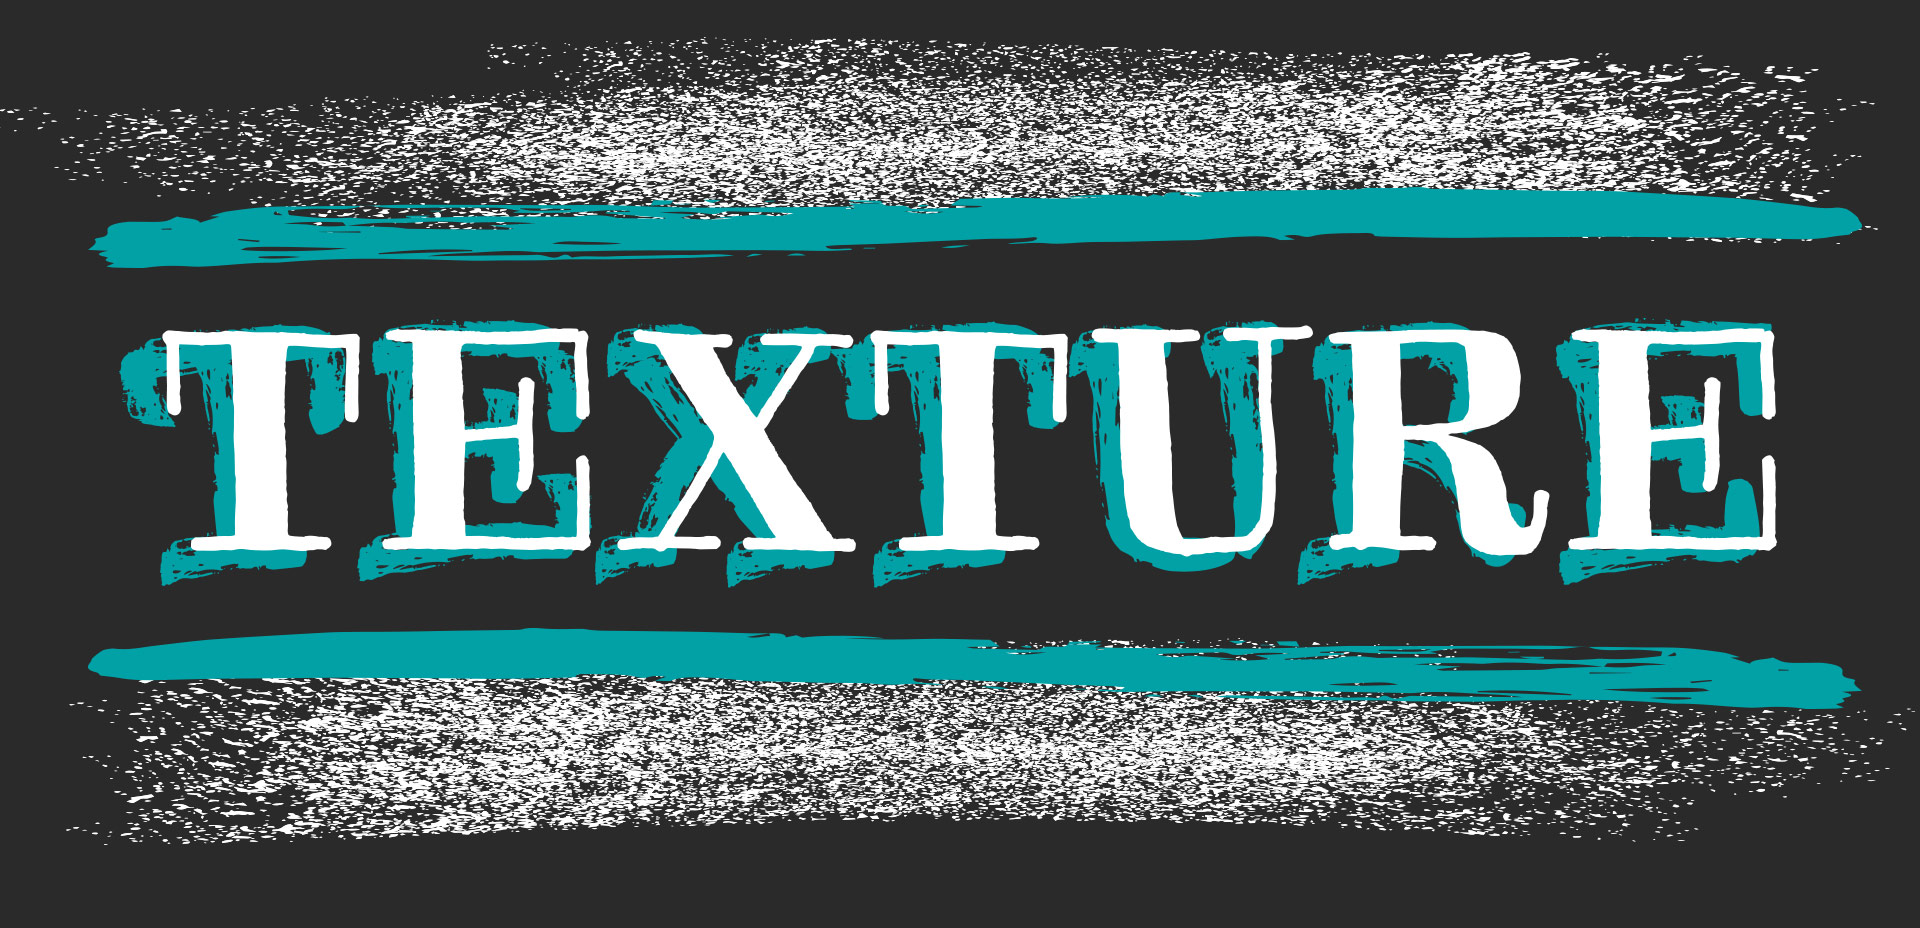 how to create illustrator texture brushes